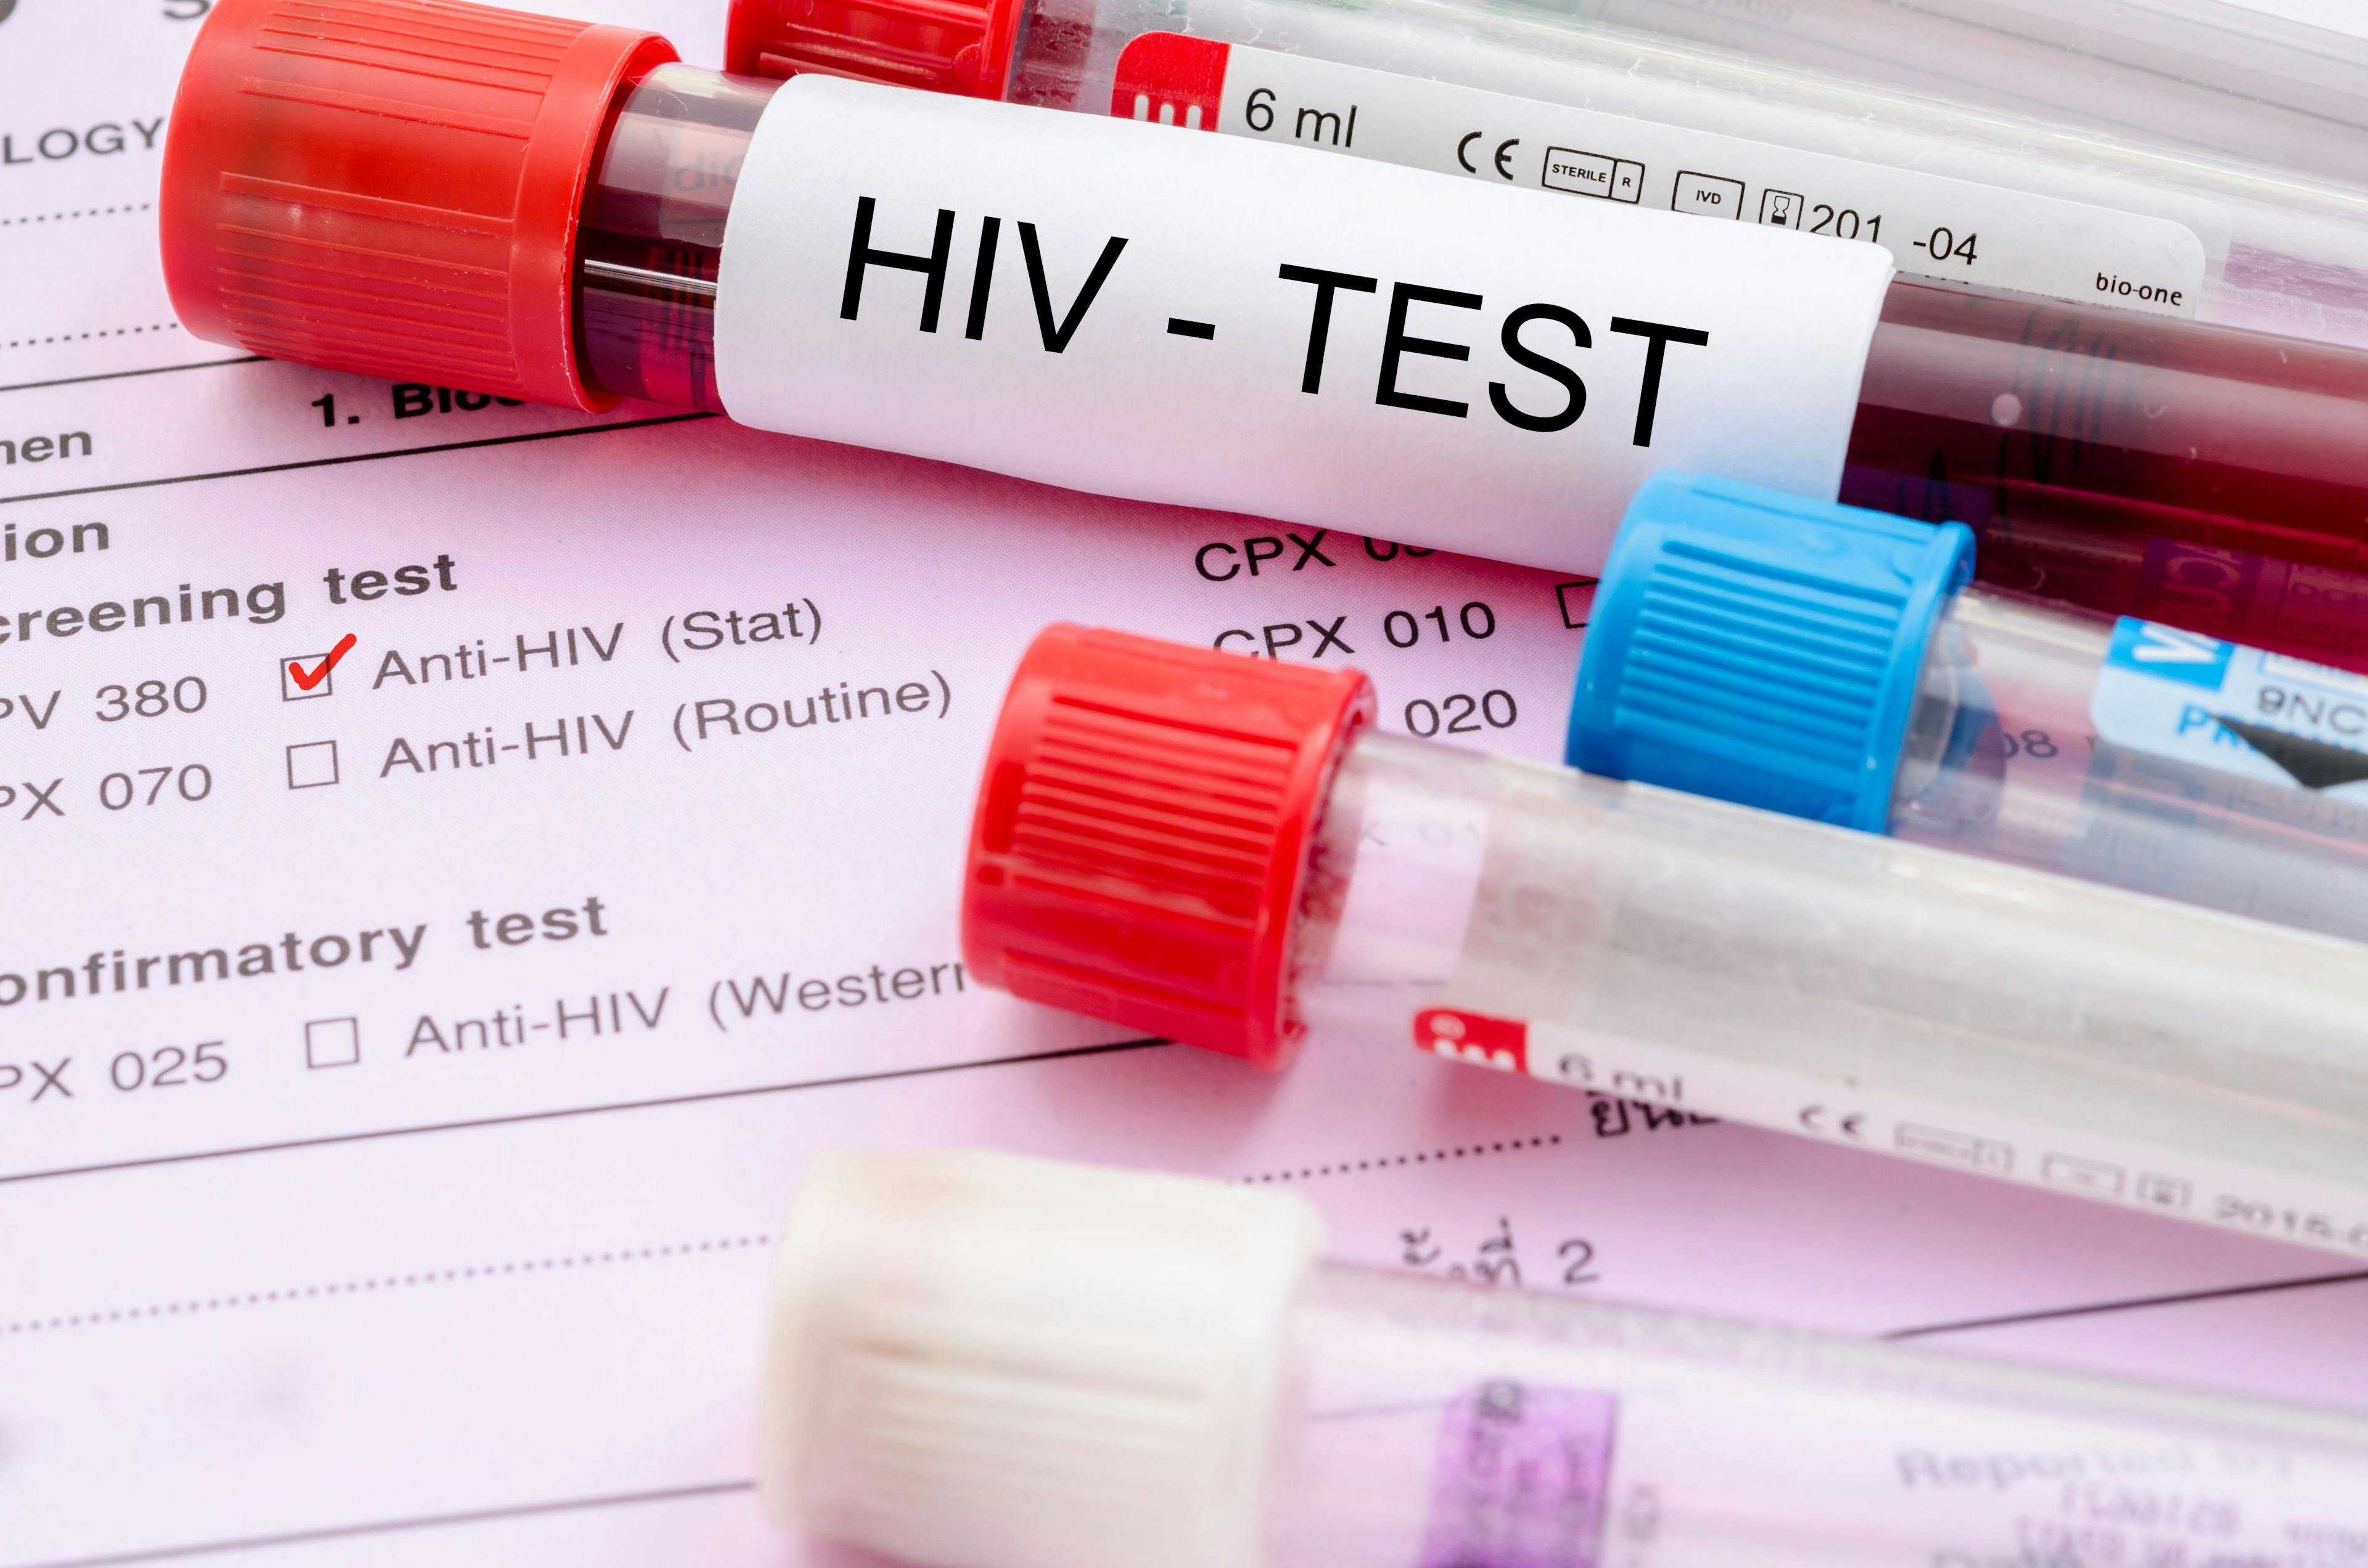 New, Highly Virulent HIV Variant Found in the Netherlands